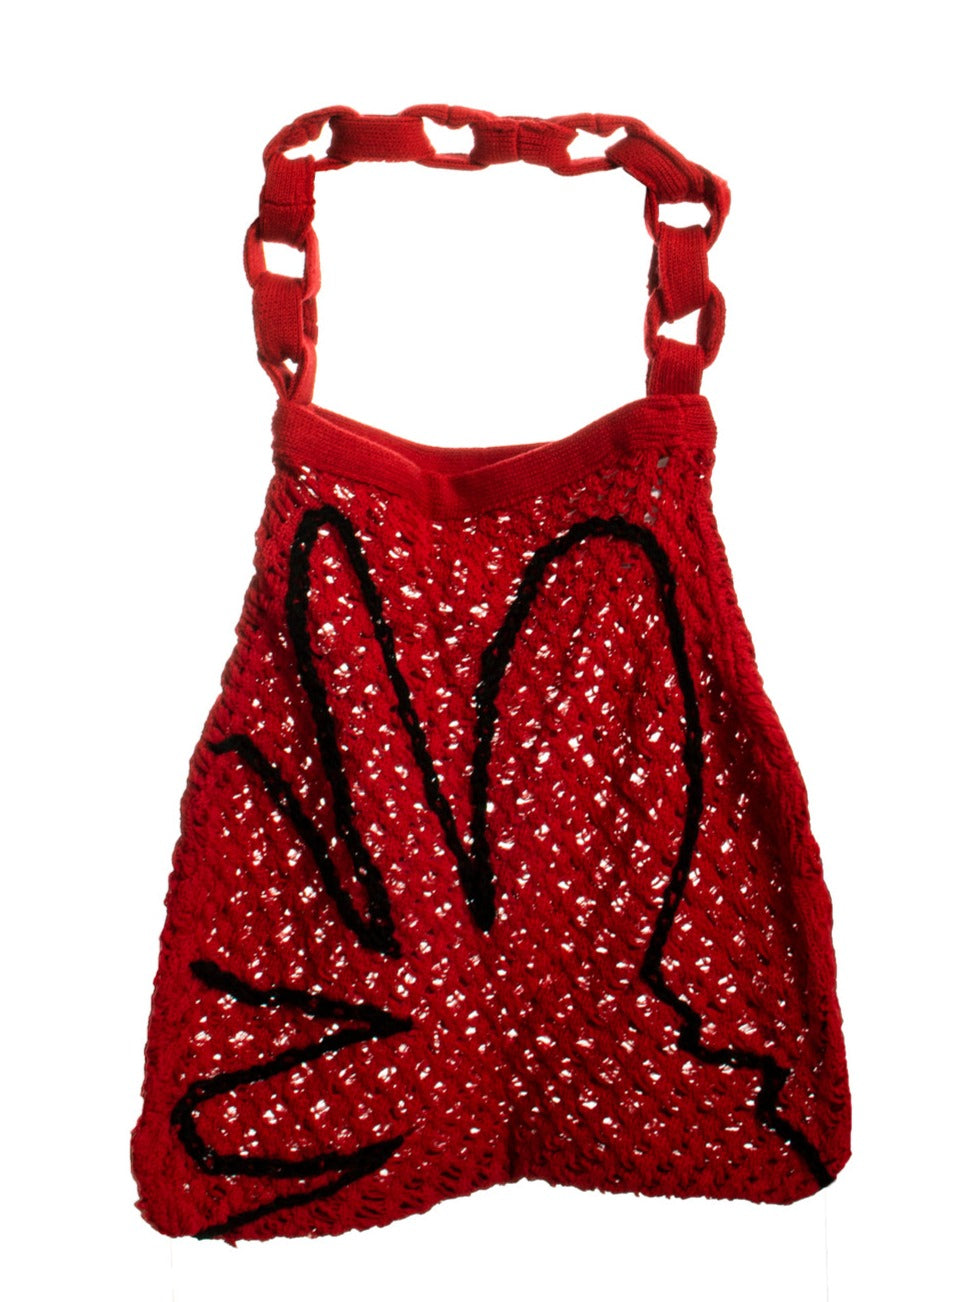 Tote Bag Knitted Red